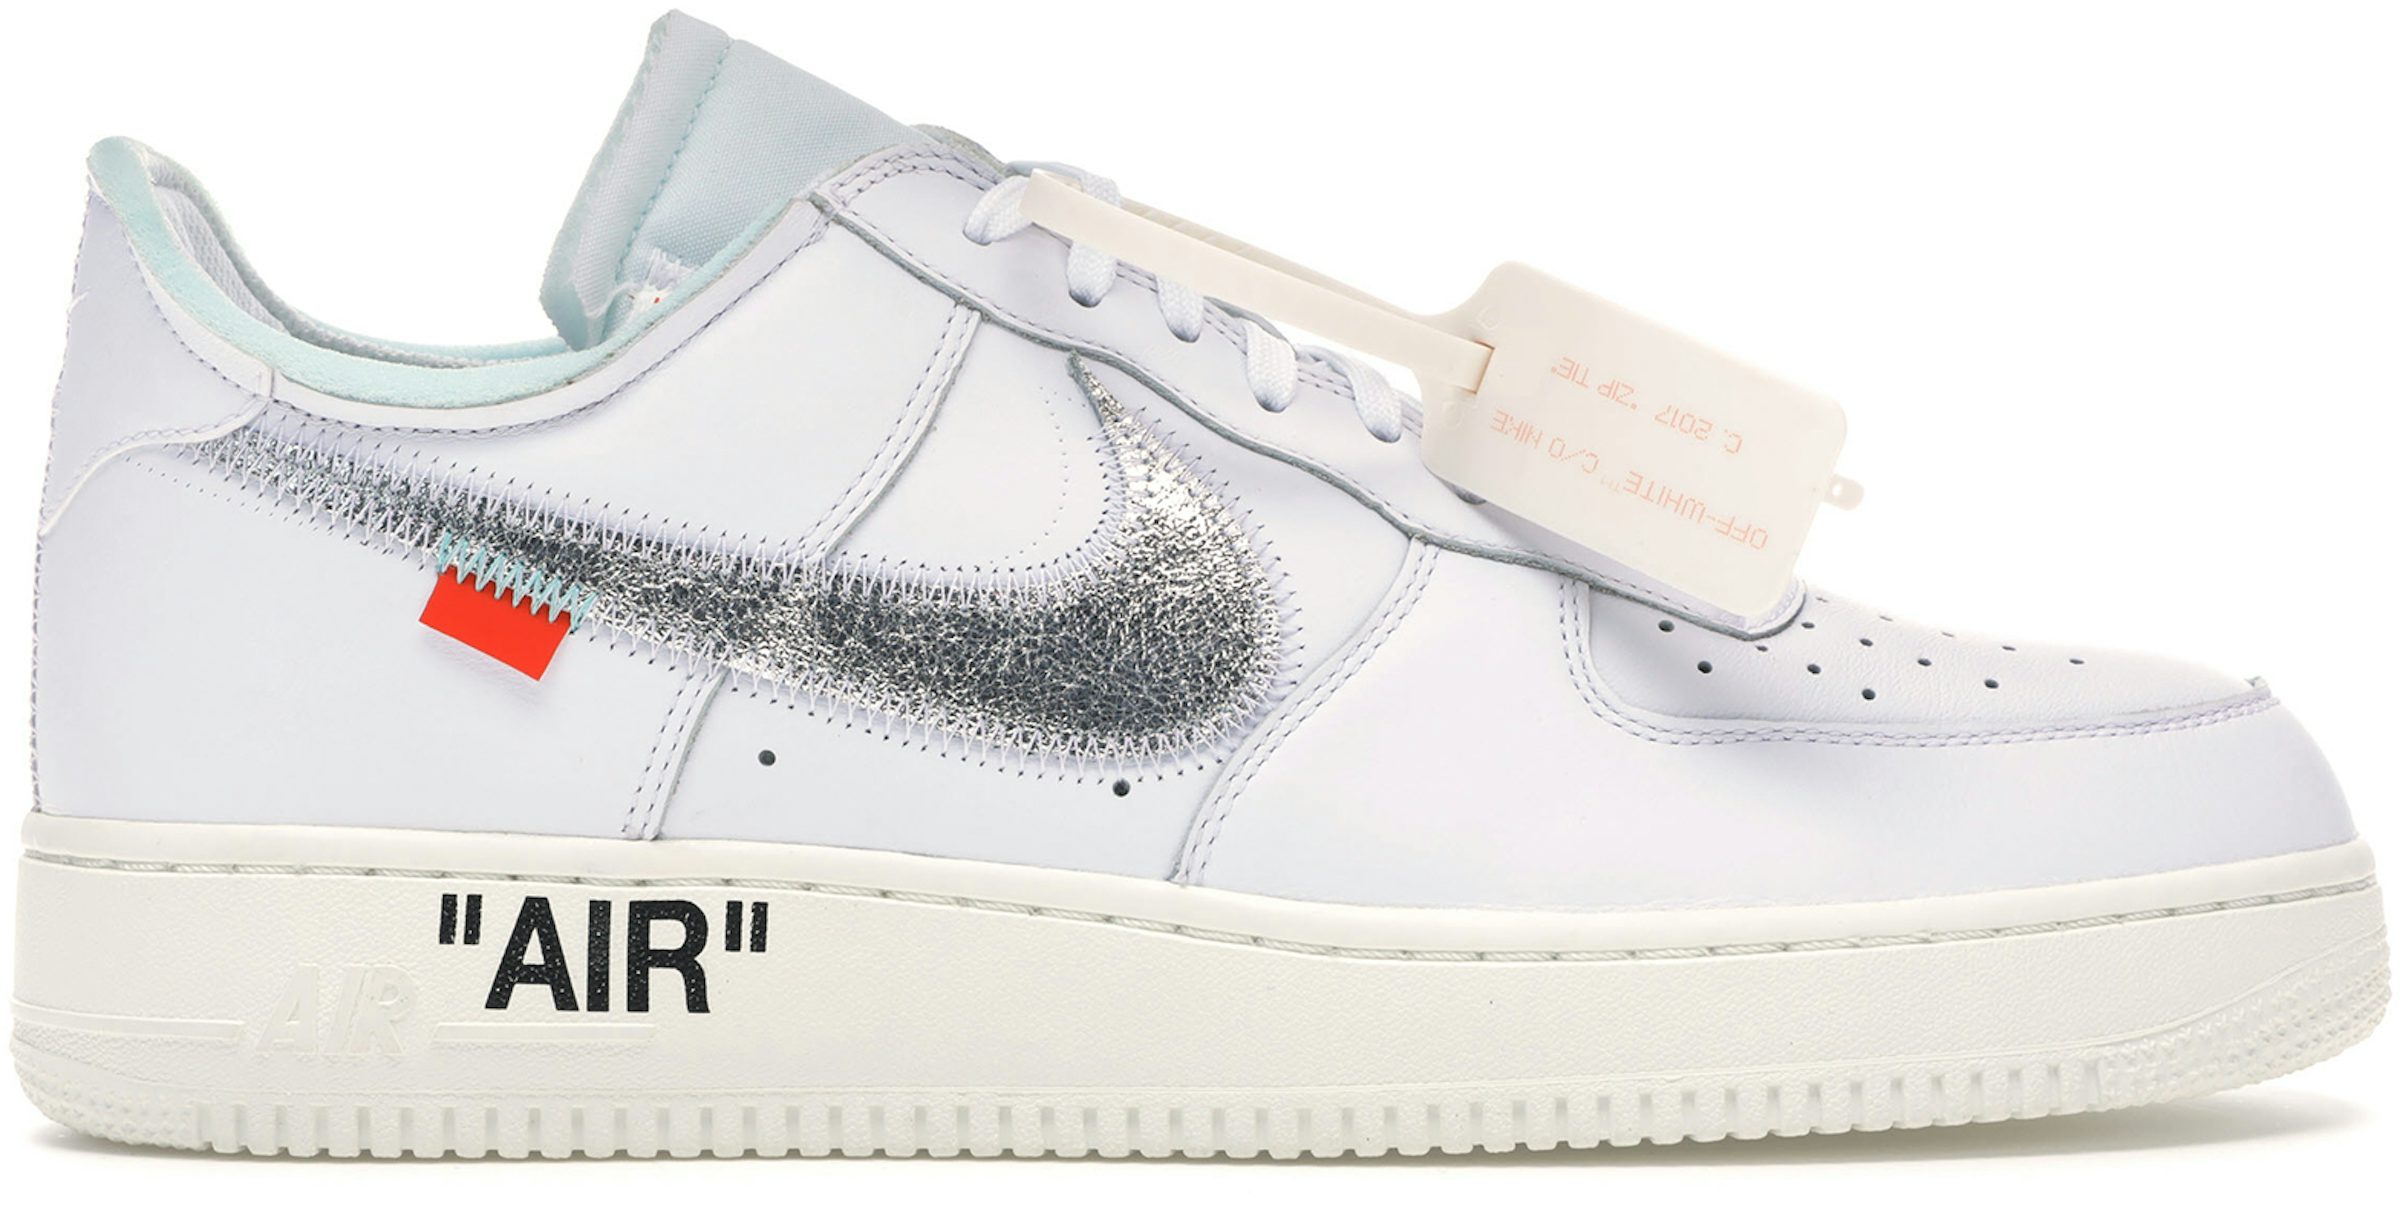 Off white x nike air force 1, one, Uk 6, US 6.5, Virgil Abloh, Top